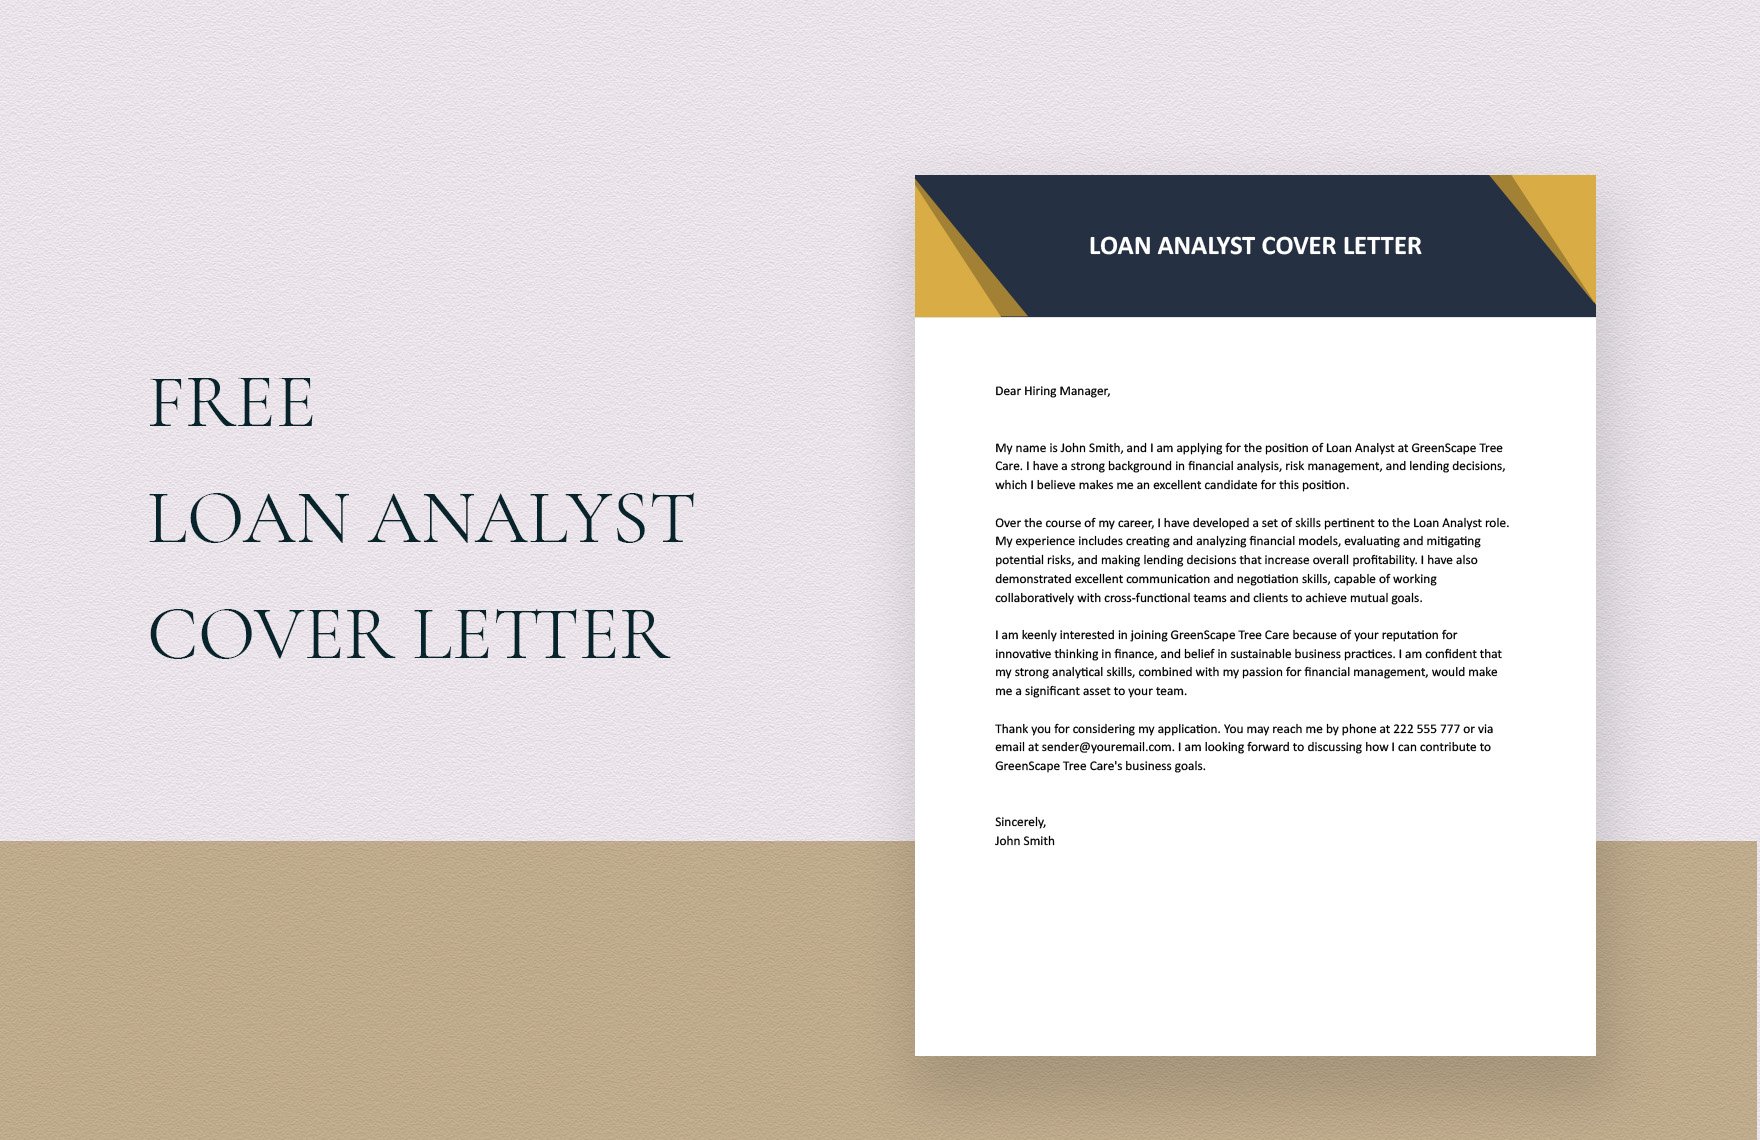 Loan Analyst Cover Letter